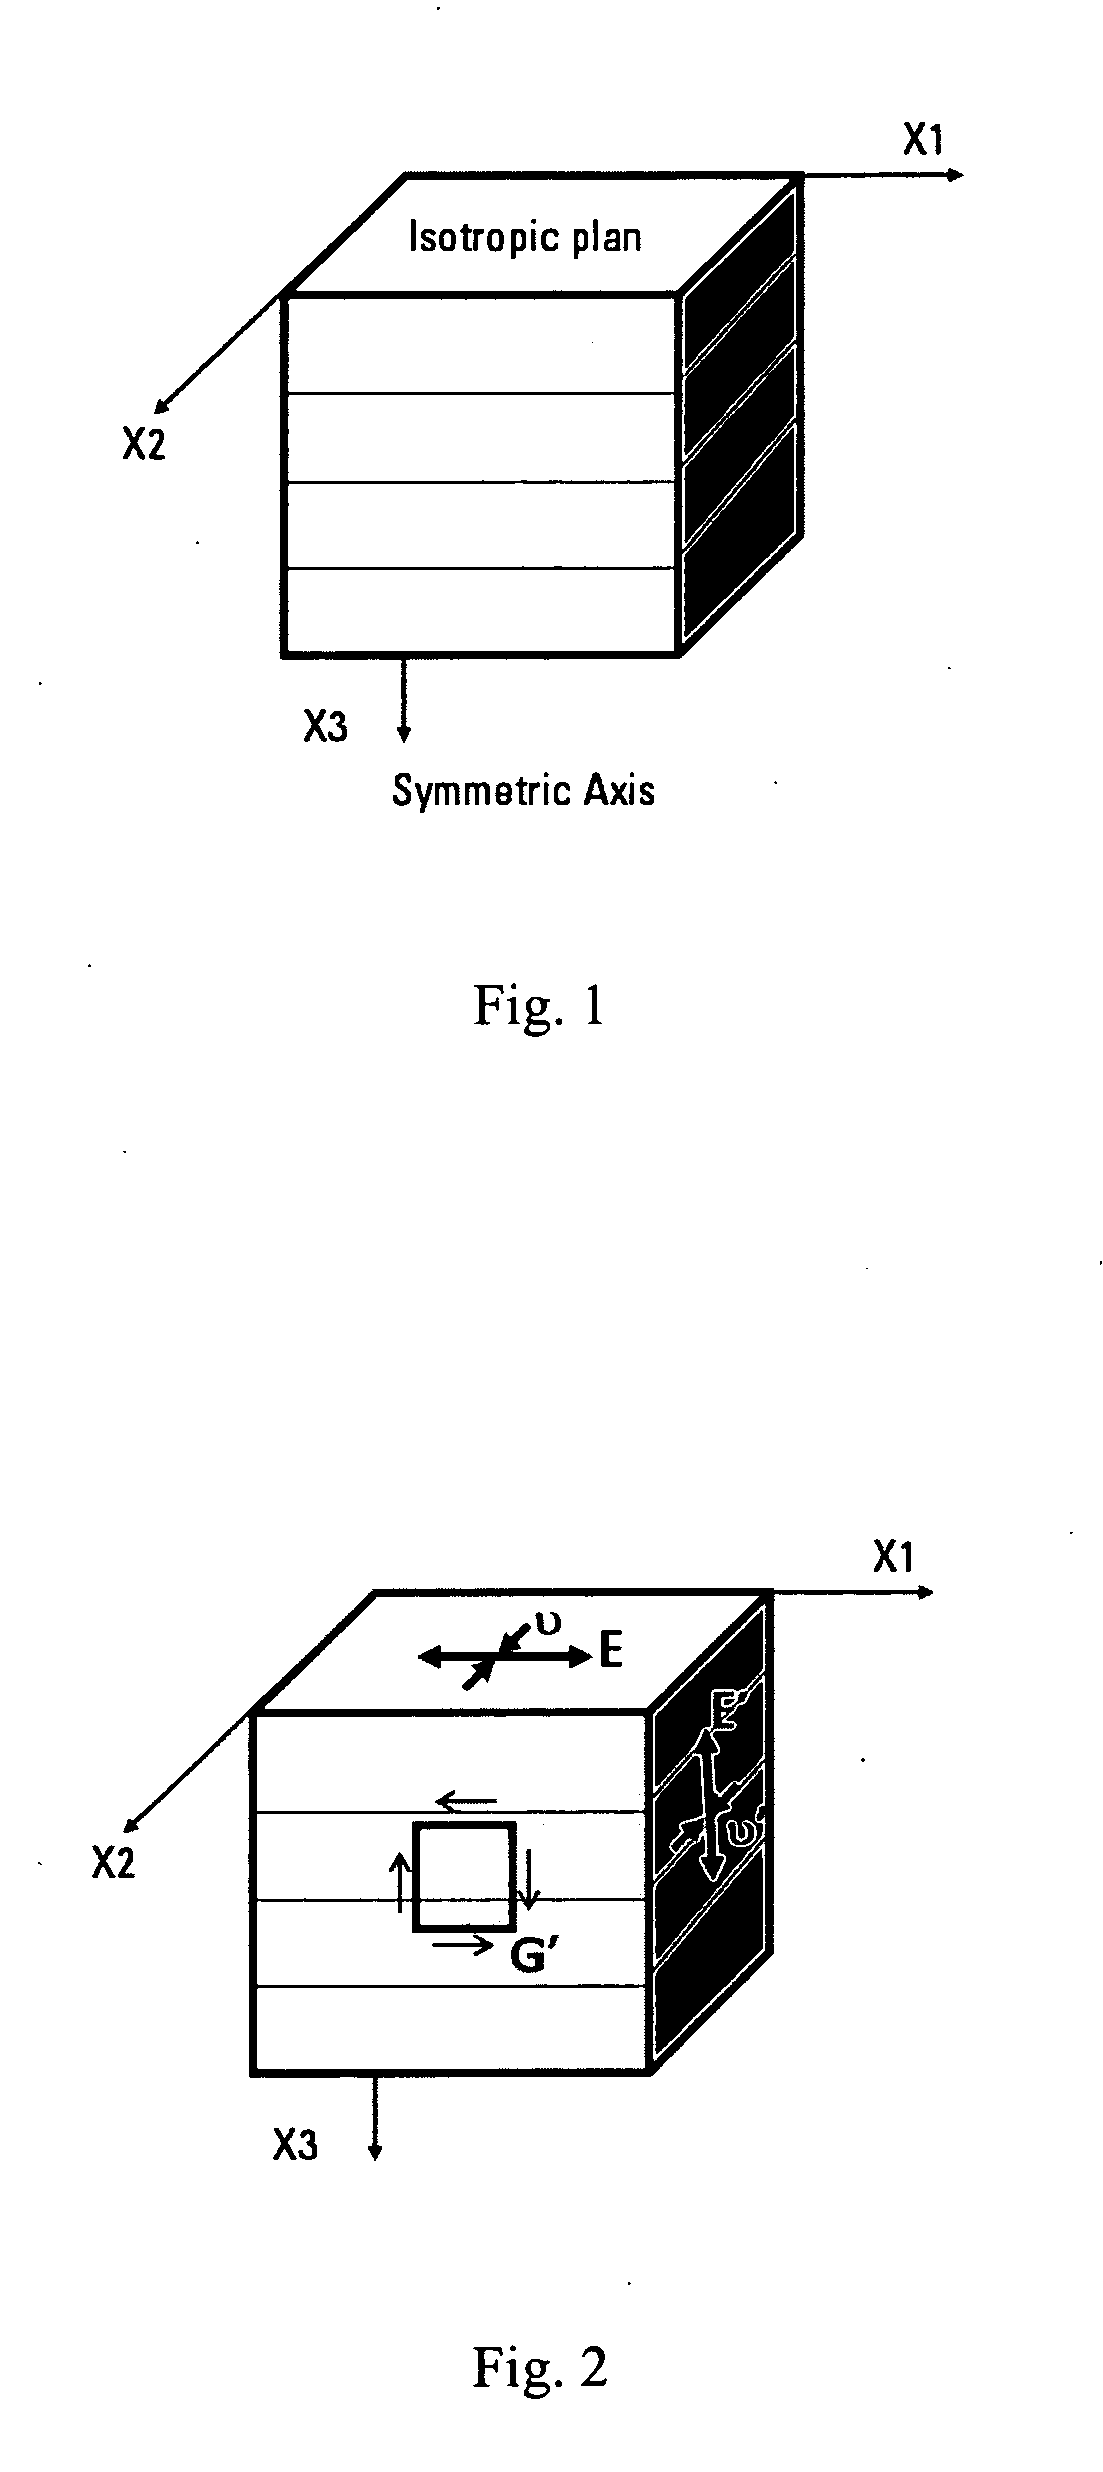 Method and apparatus for evaluating elastic mechanical properties of a transversely isotropic formation